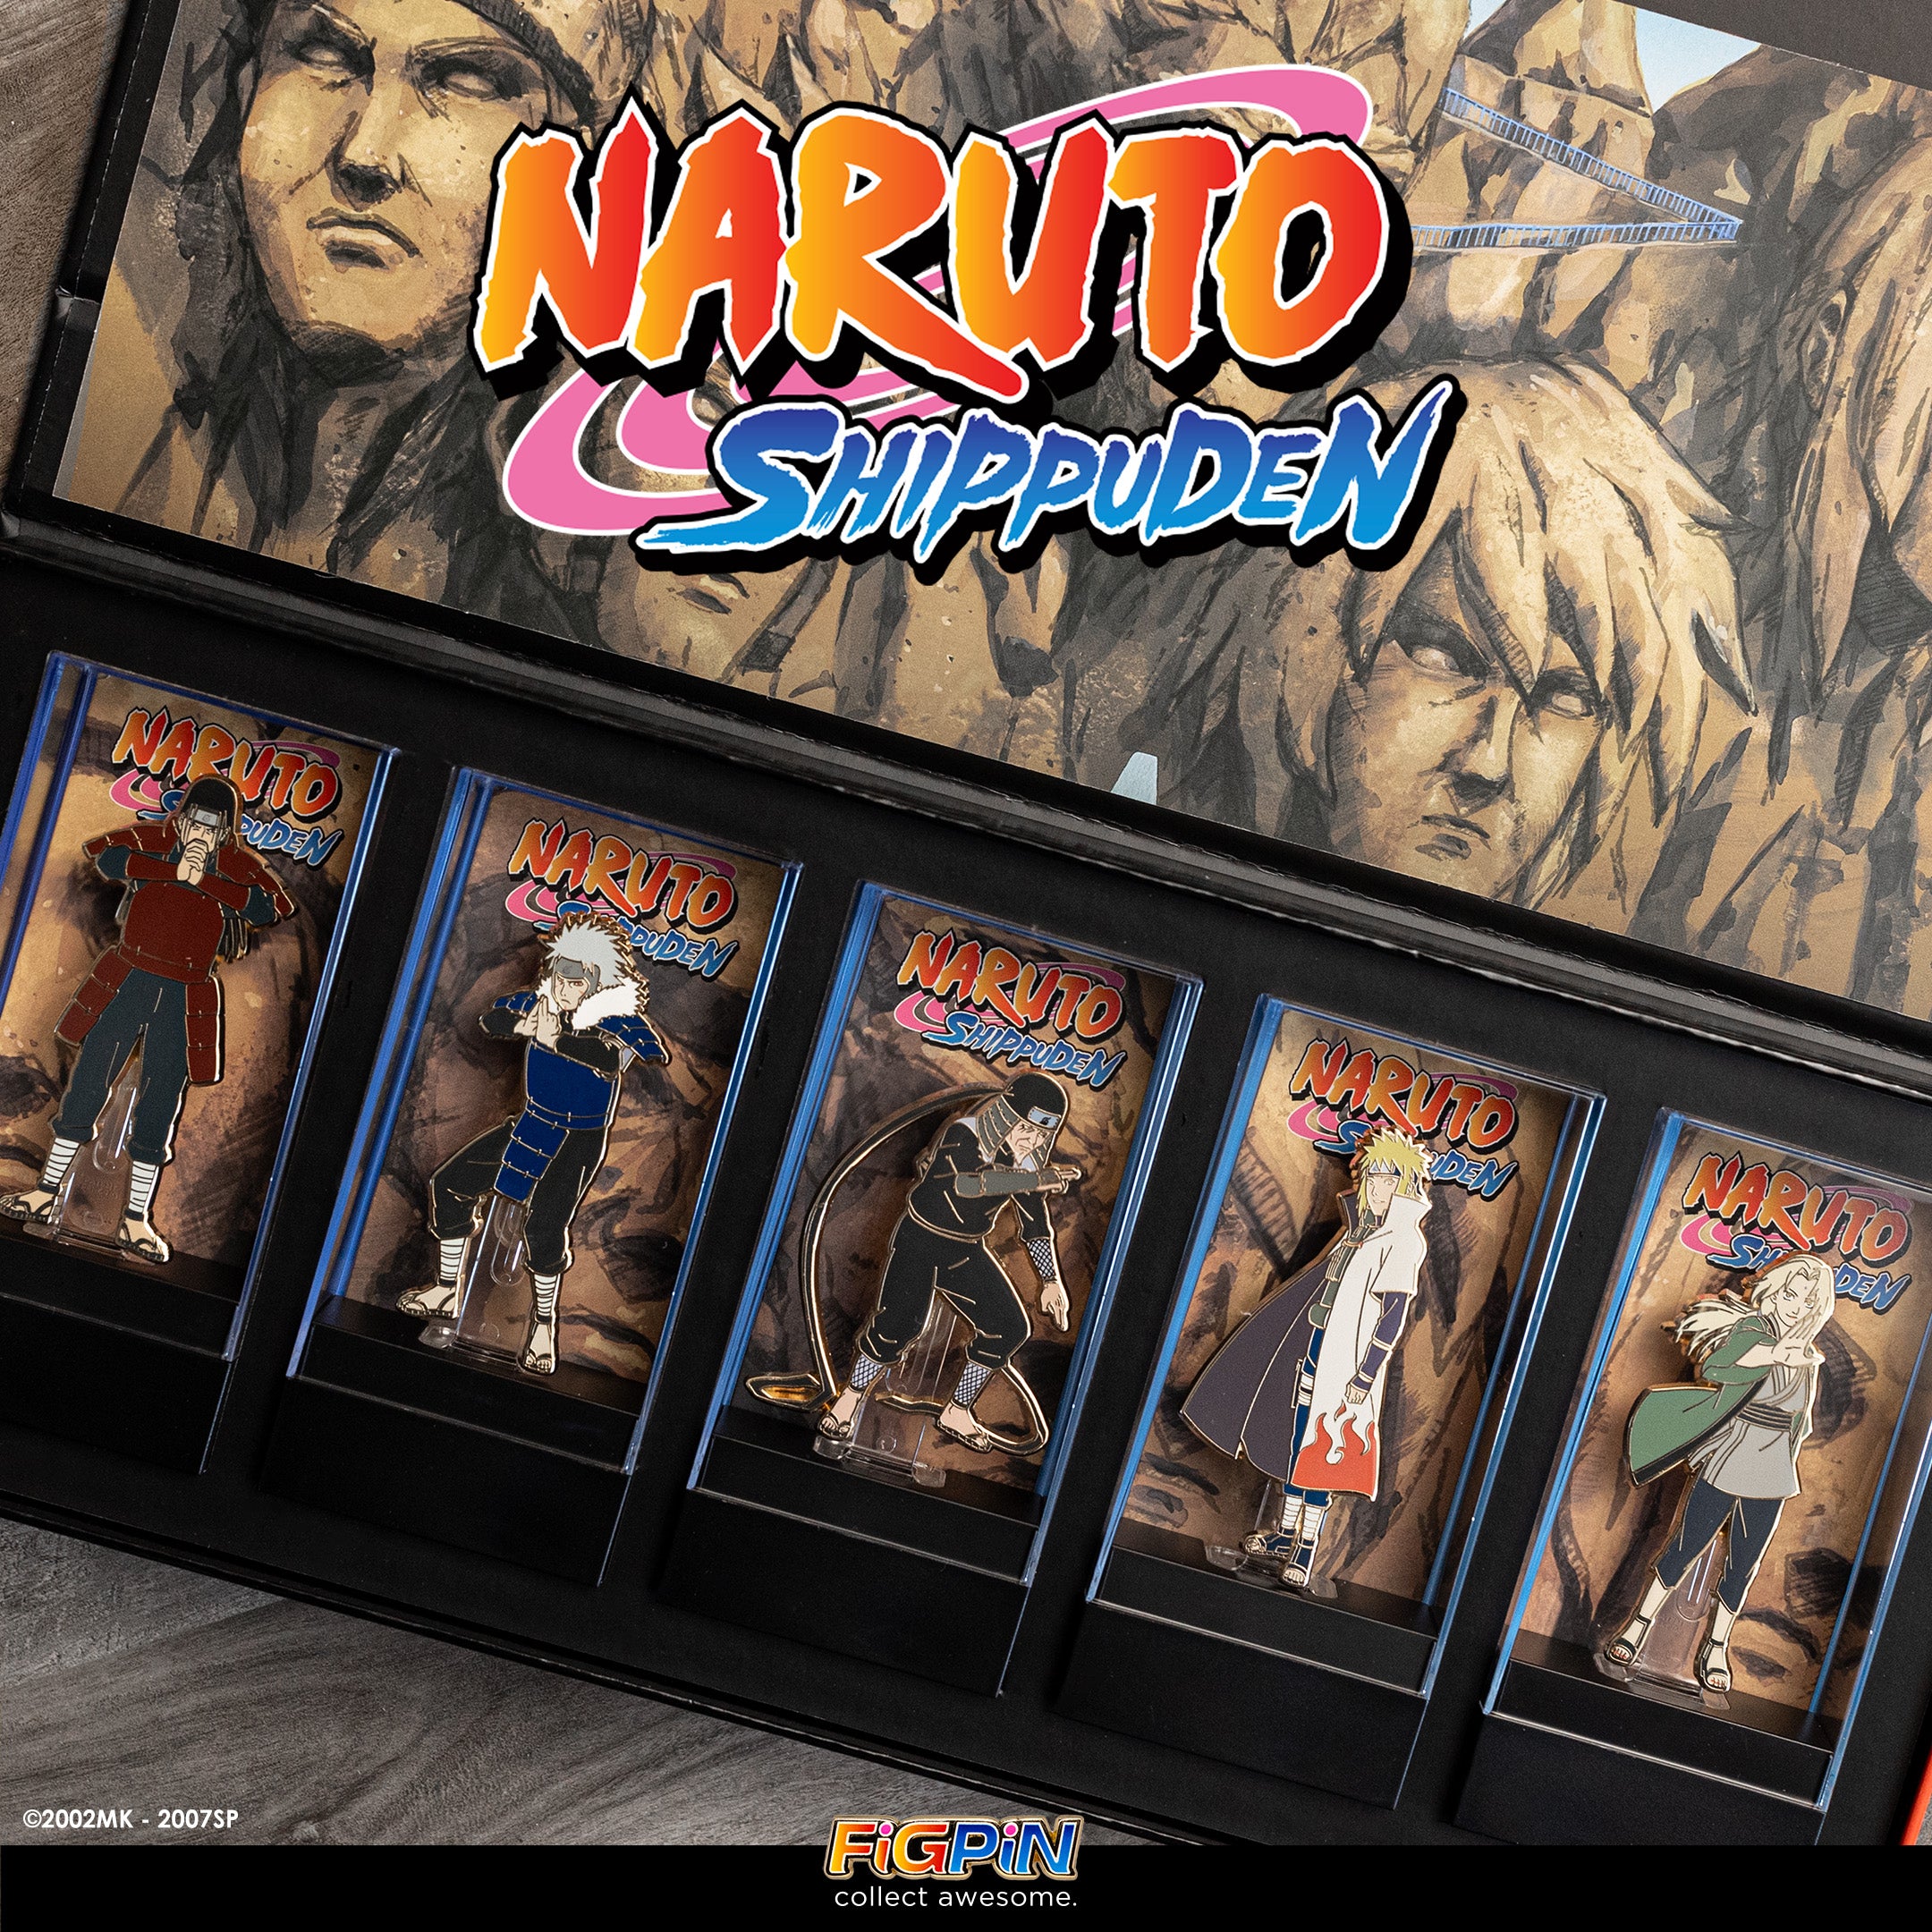 Photograph of Naruto Shippuden characters available in the deluxe box set